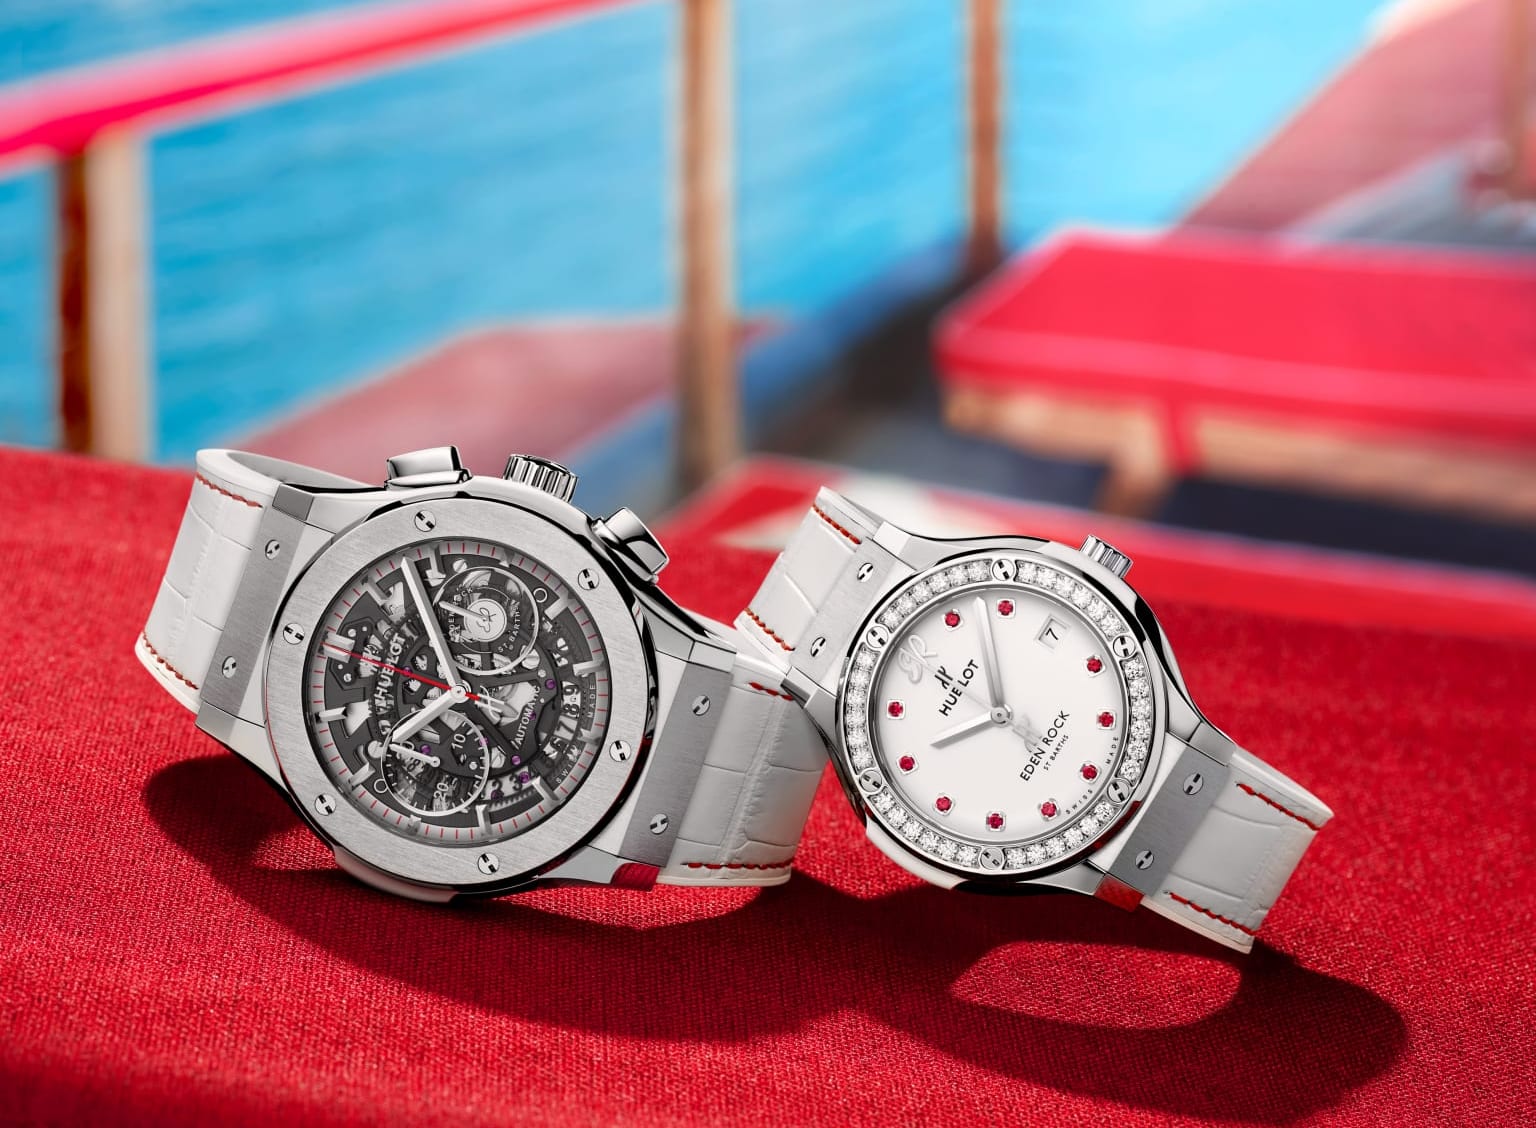 Classic fusion aerofusion chronograph special edition eden rock st barths and classic fusion special edition eden rock st barths e1576228102633